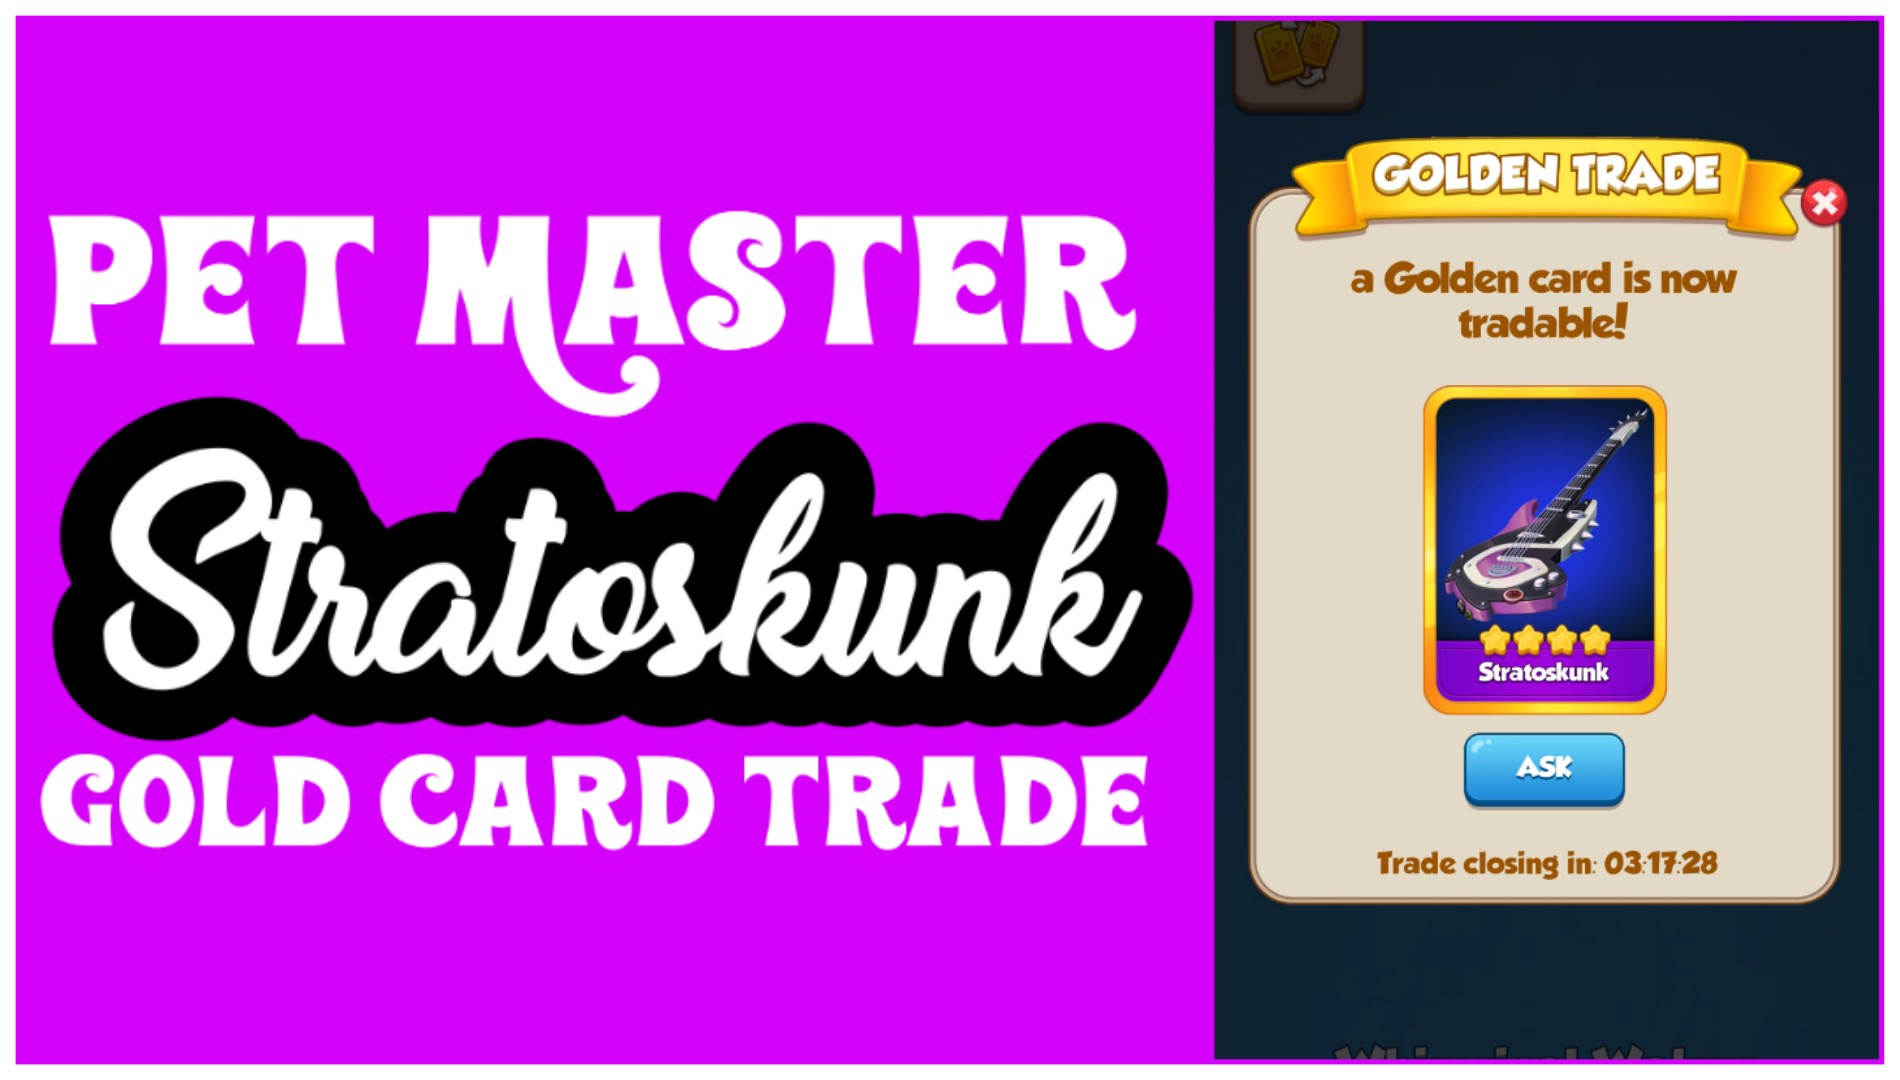 Stratoskunk Gold Card Trade in Pet Master